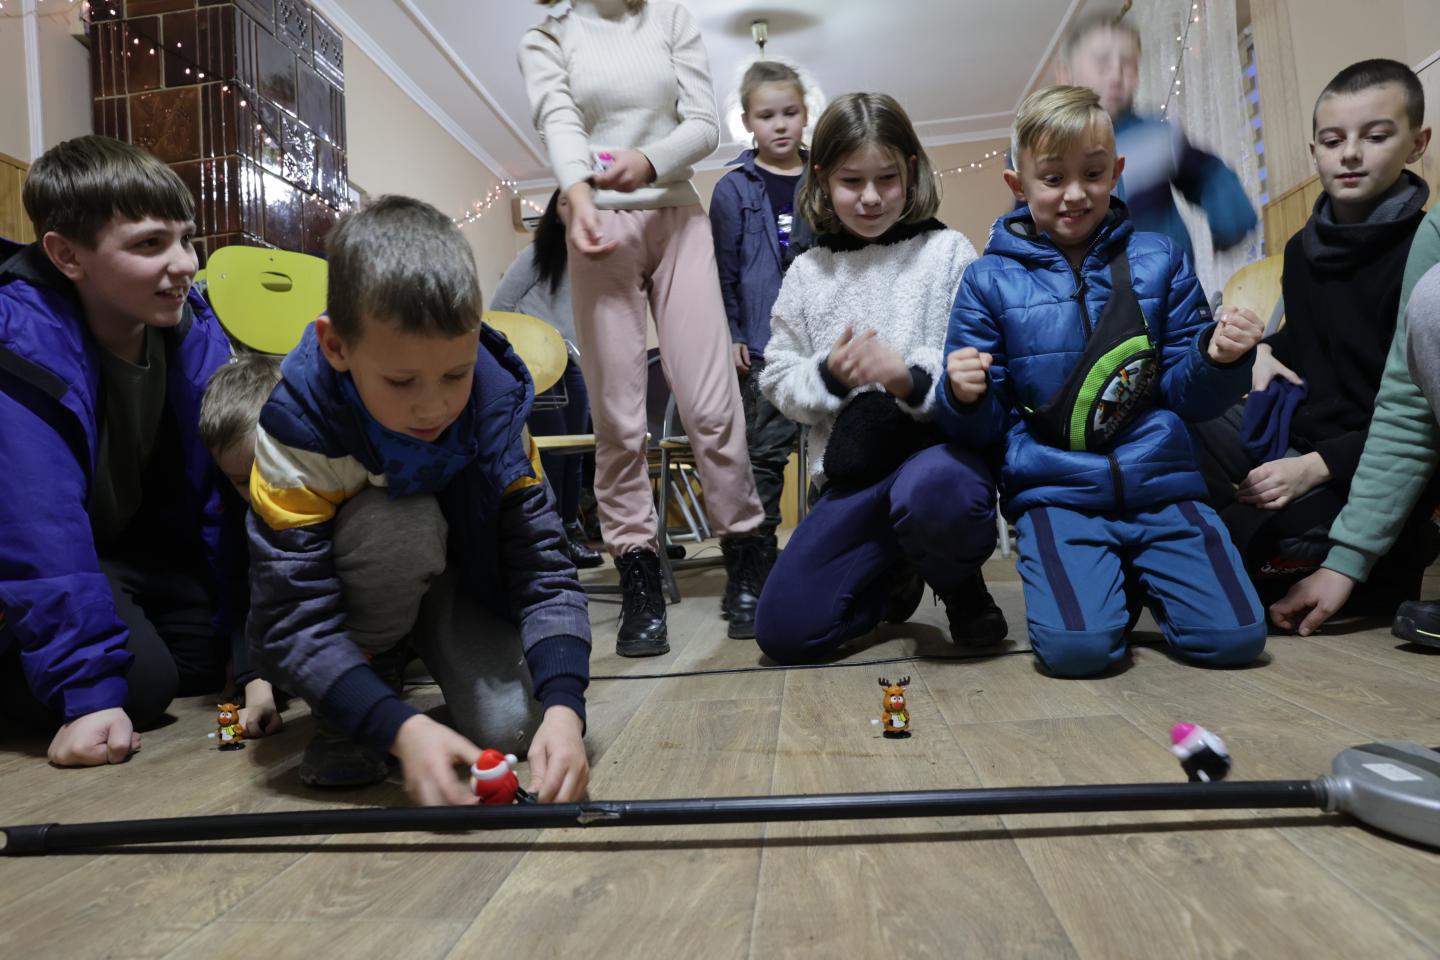 A group of children playing with toys in a shelter